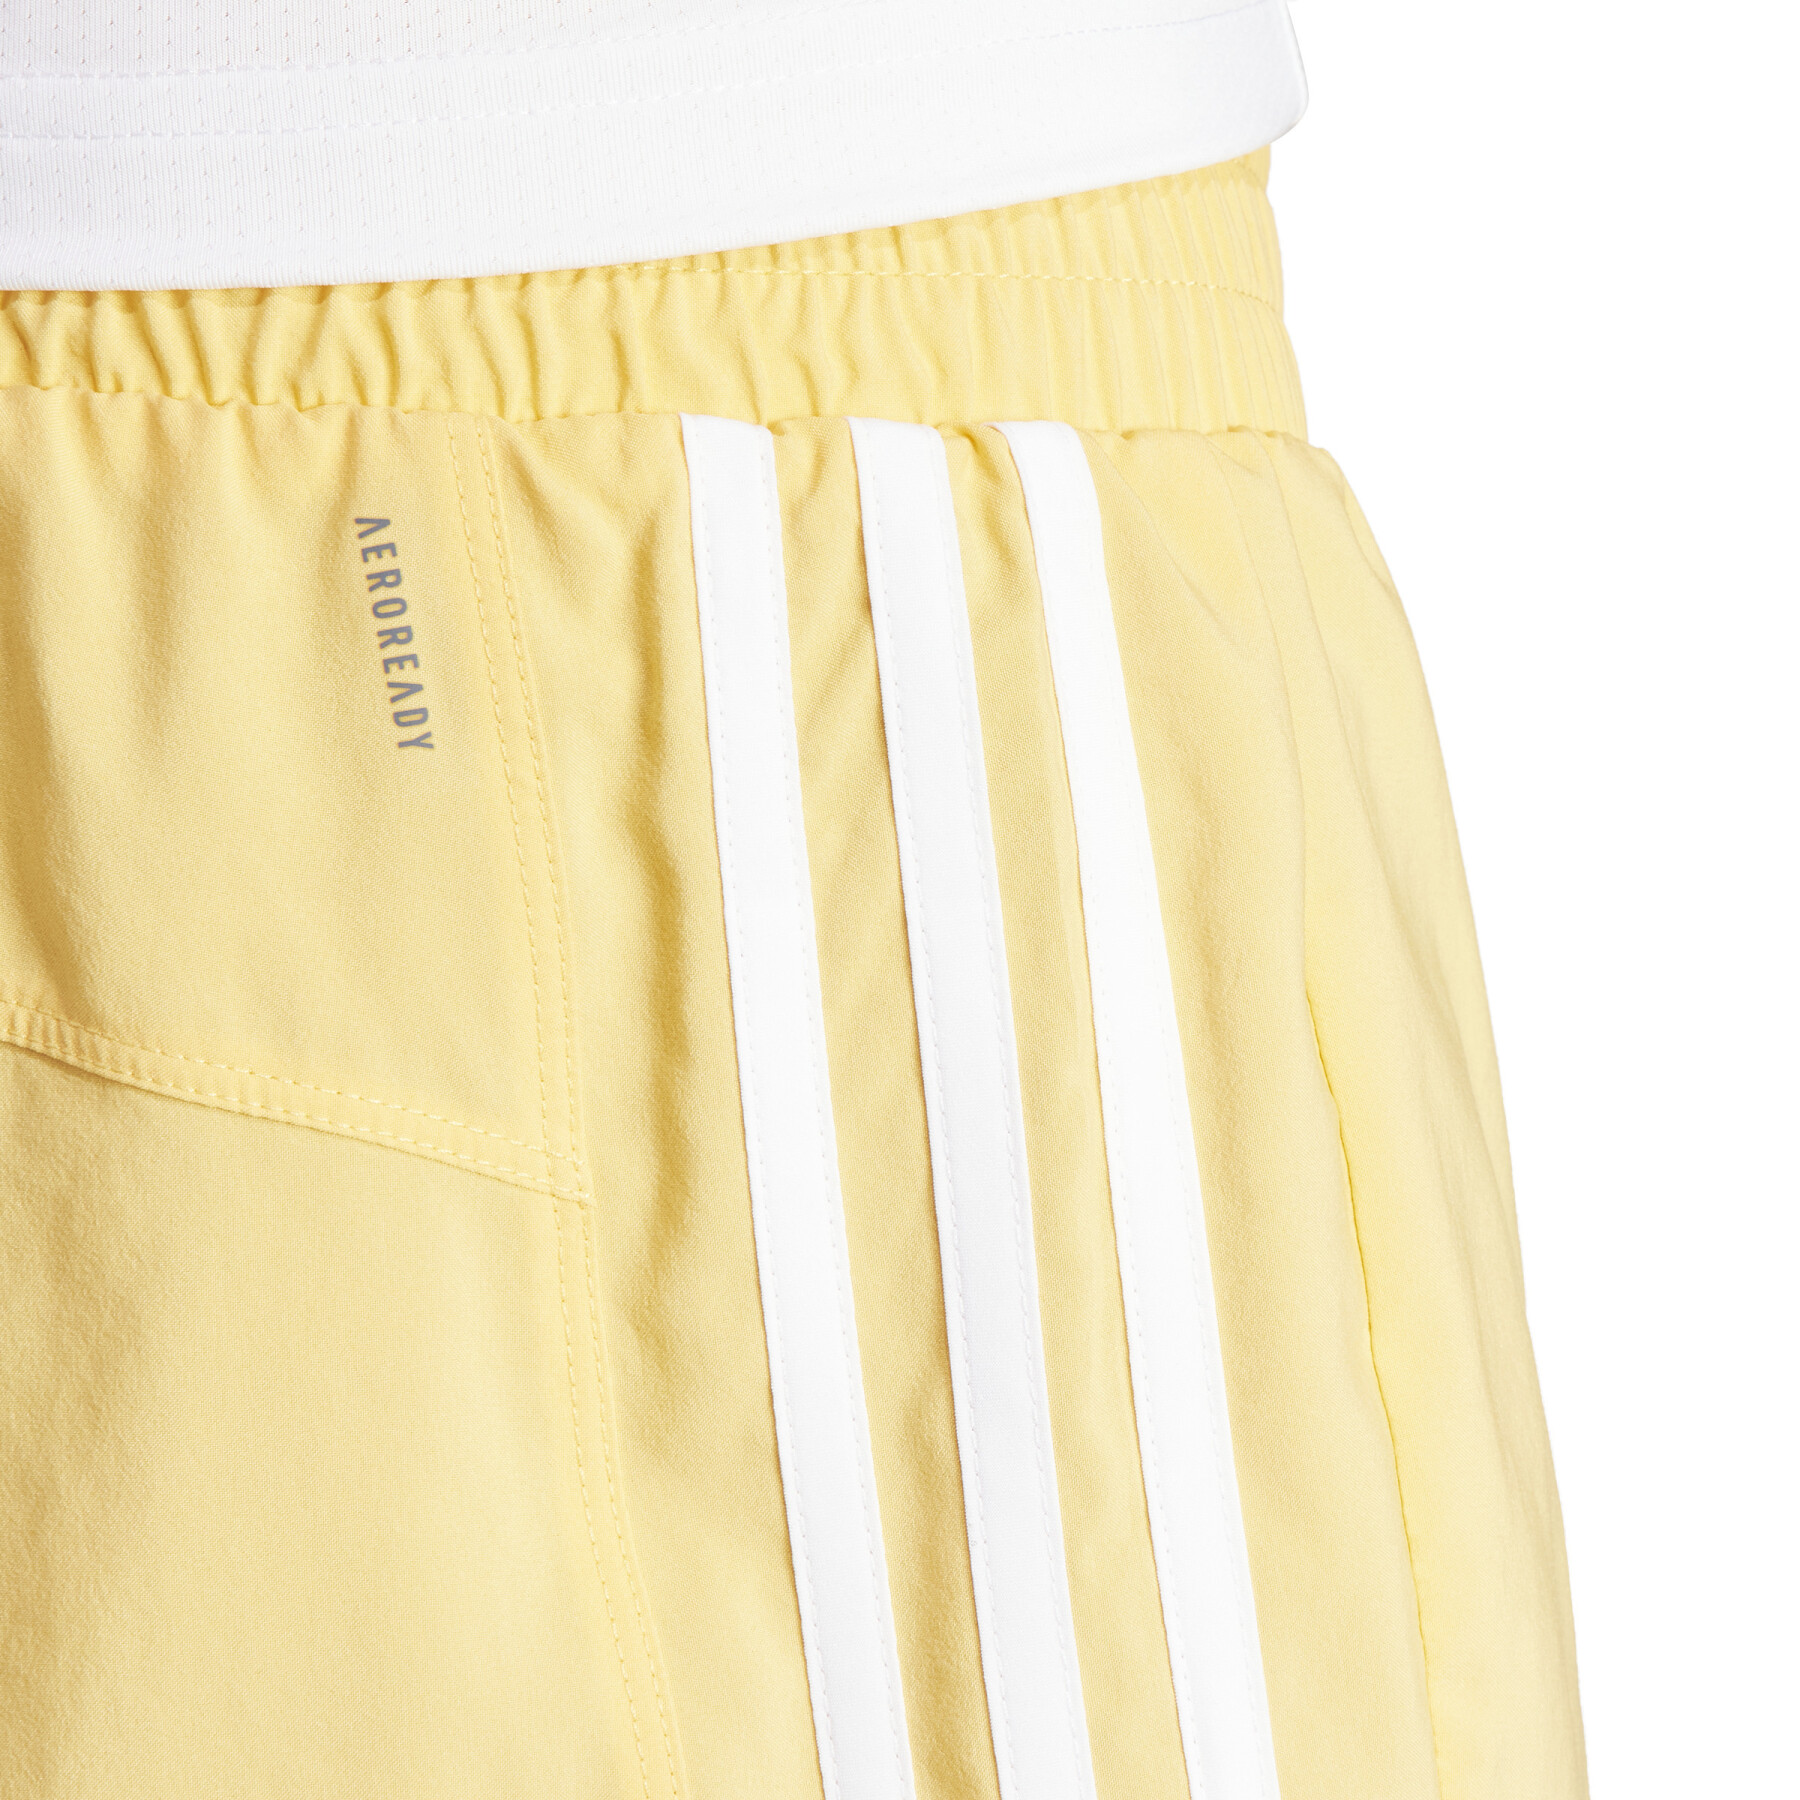 Women's 3-band high-waisted shorts adidas Pacer